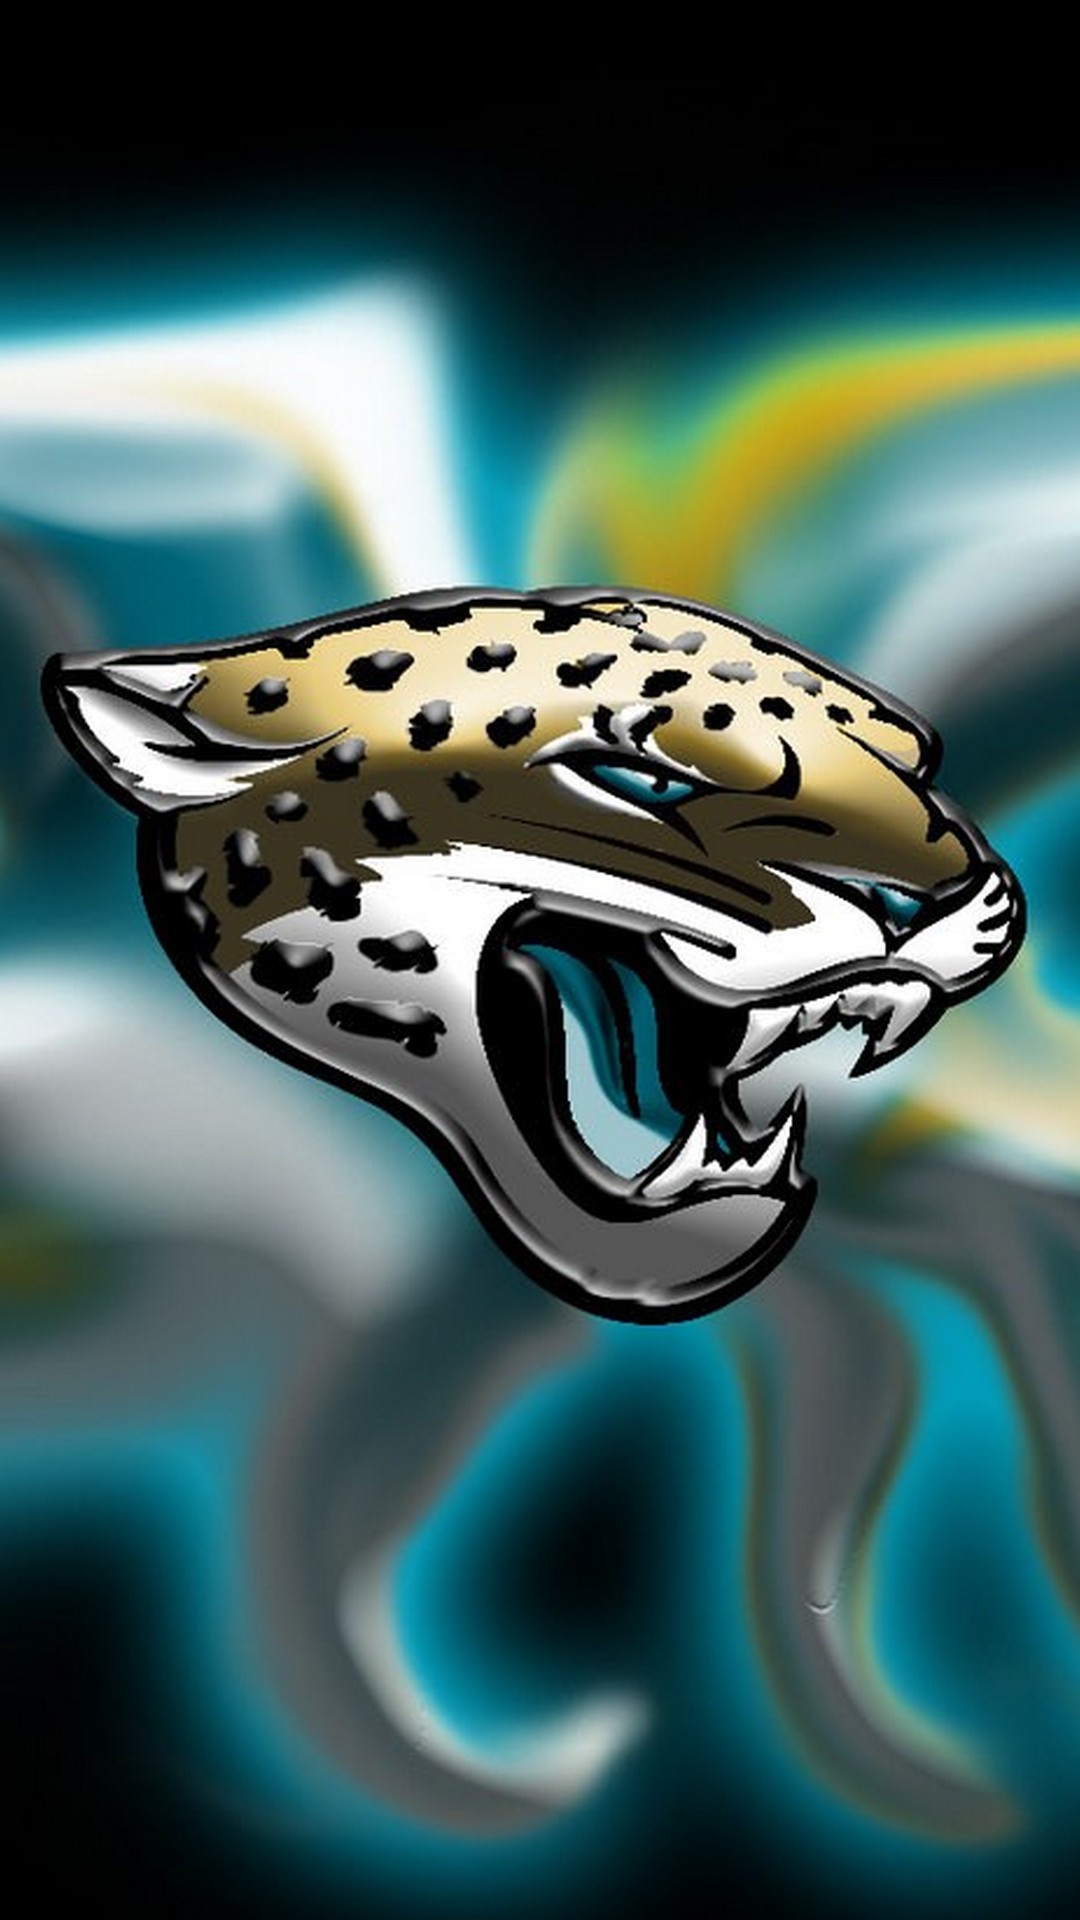 Jacksonville Jaguars iPhone Wallpaper Size with high-resolution 1080x1920 pixel. Donwload and set as wallpaper for your iPhone X, iPhone XS home screen backgrounds, XS Max, XR, iPhone8 lock screen wallpaper, iPhone 7, 6, SE and other mobile devices